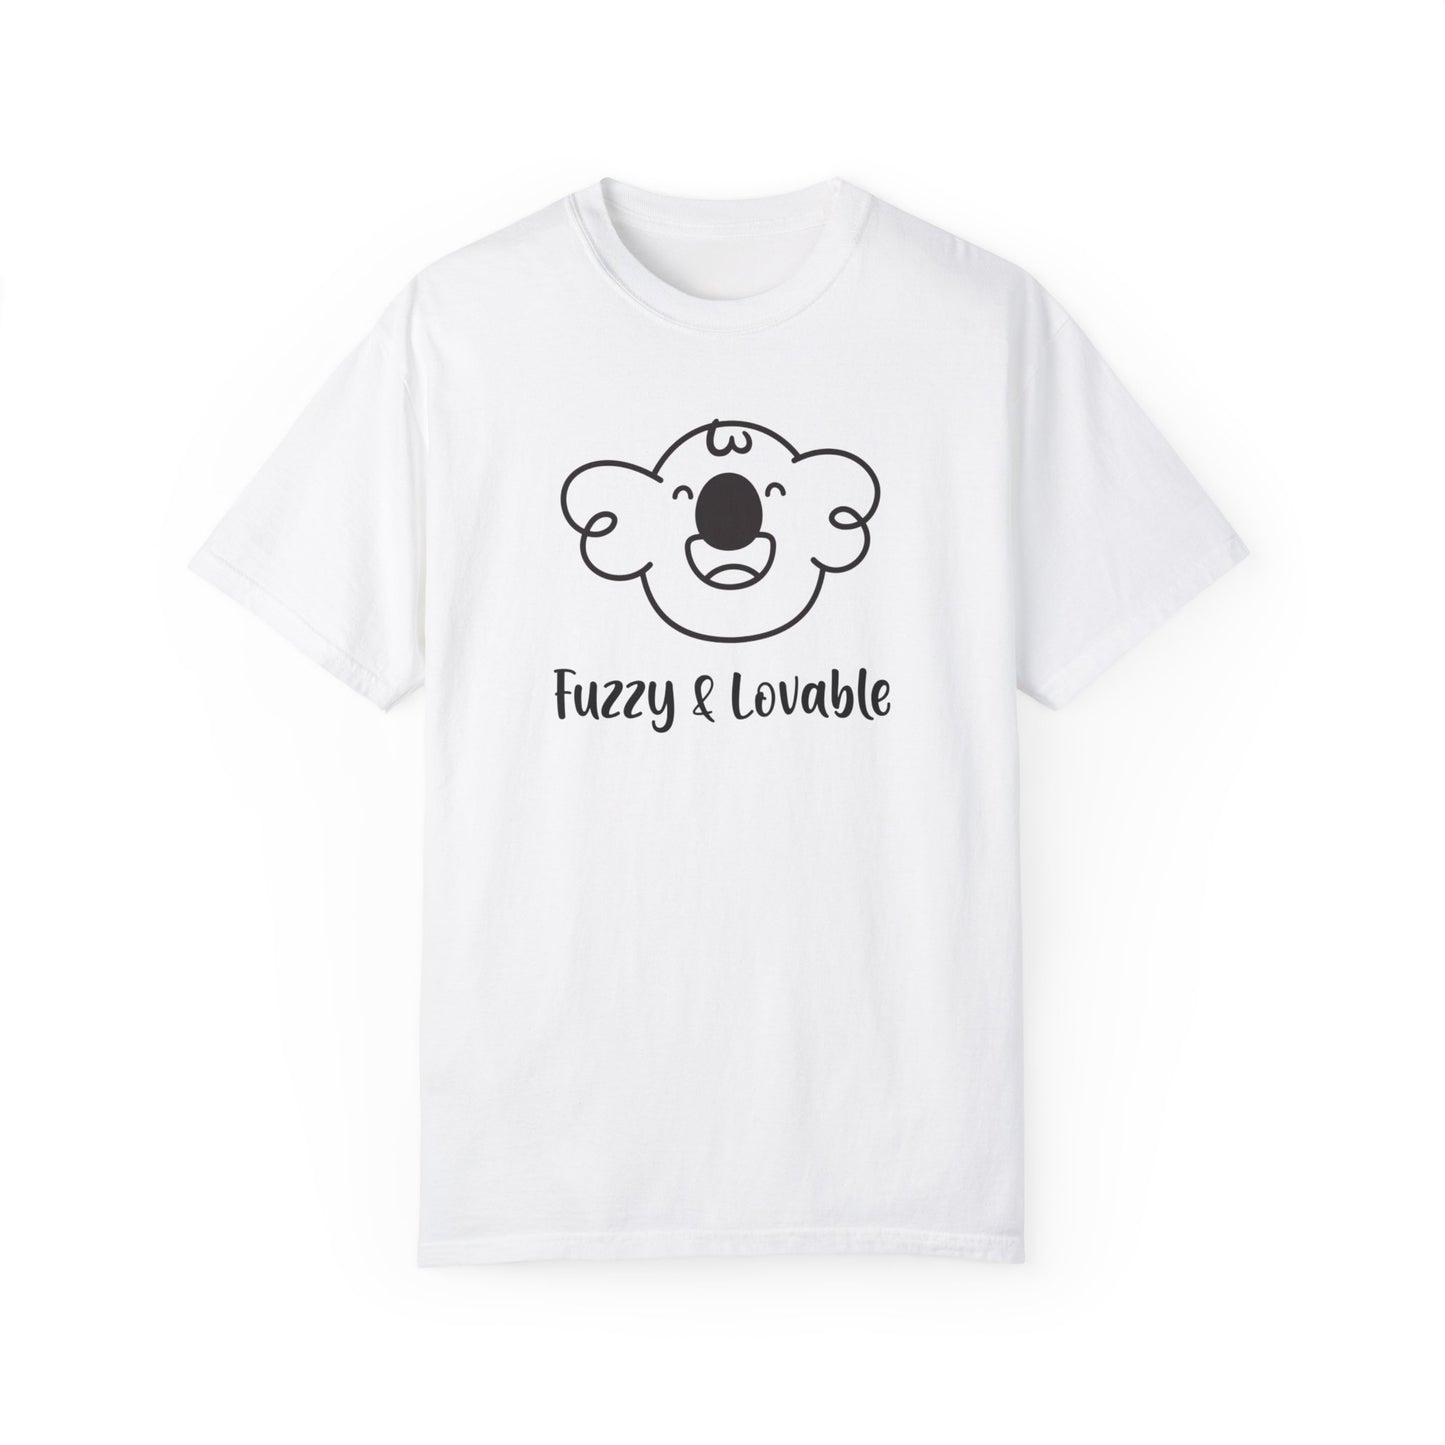 Cabbage's Fuzzy & Lovable T-shirt - Bright Colors